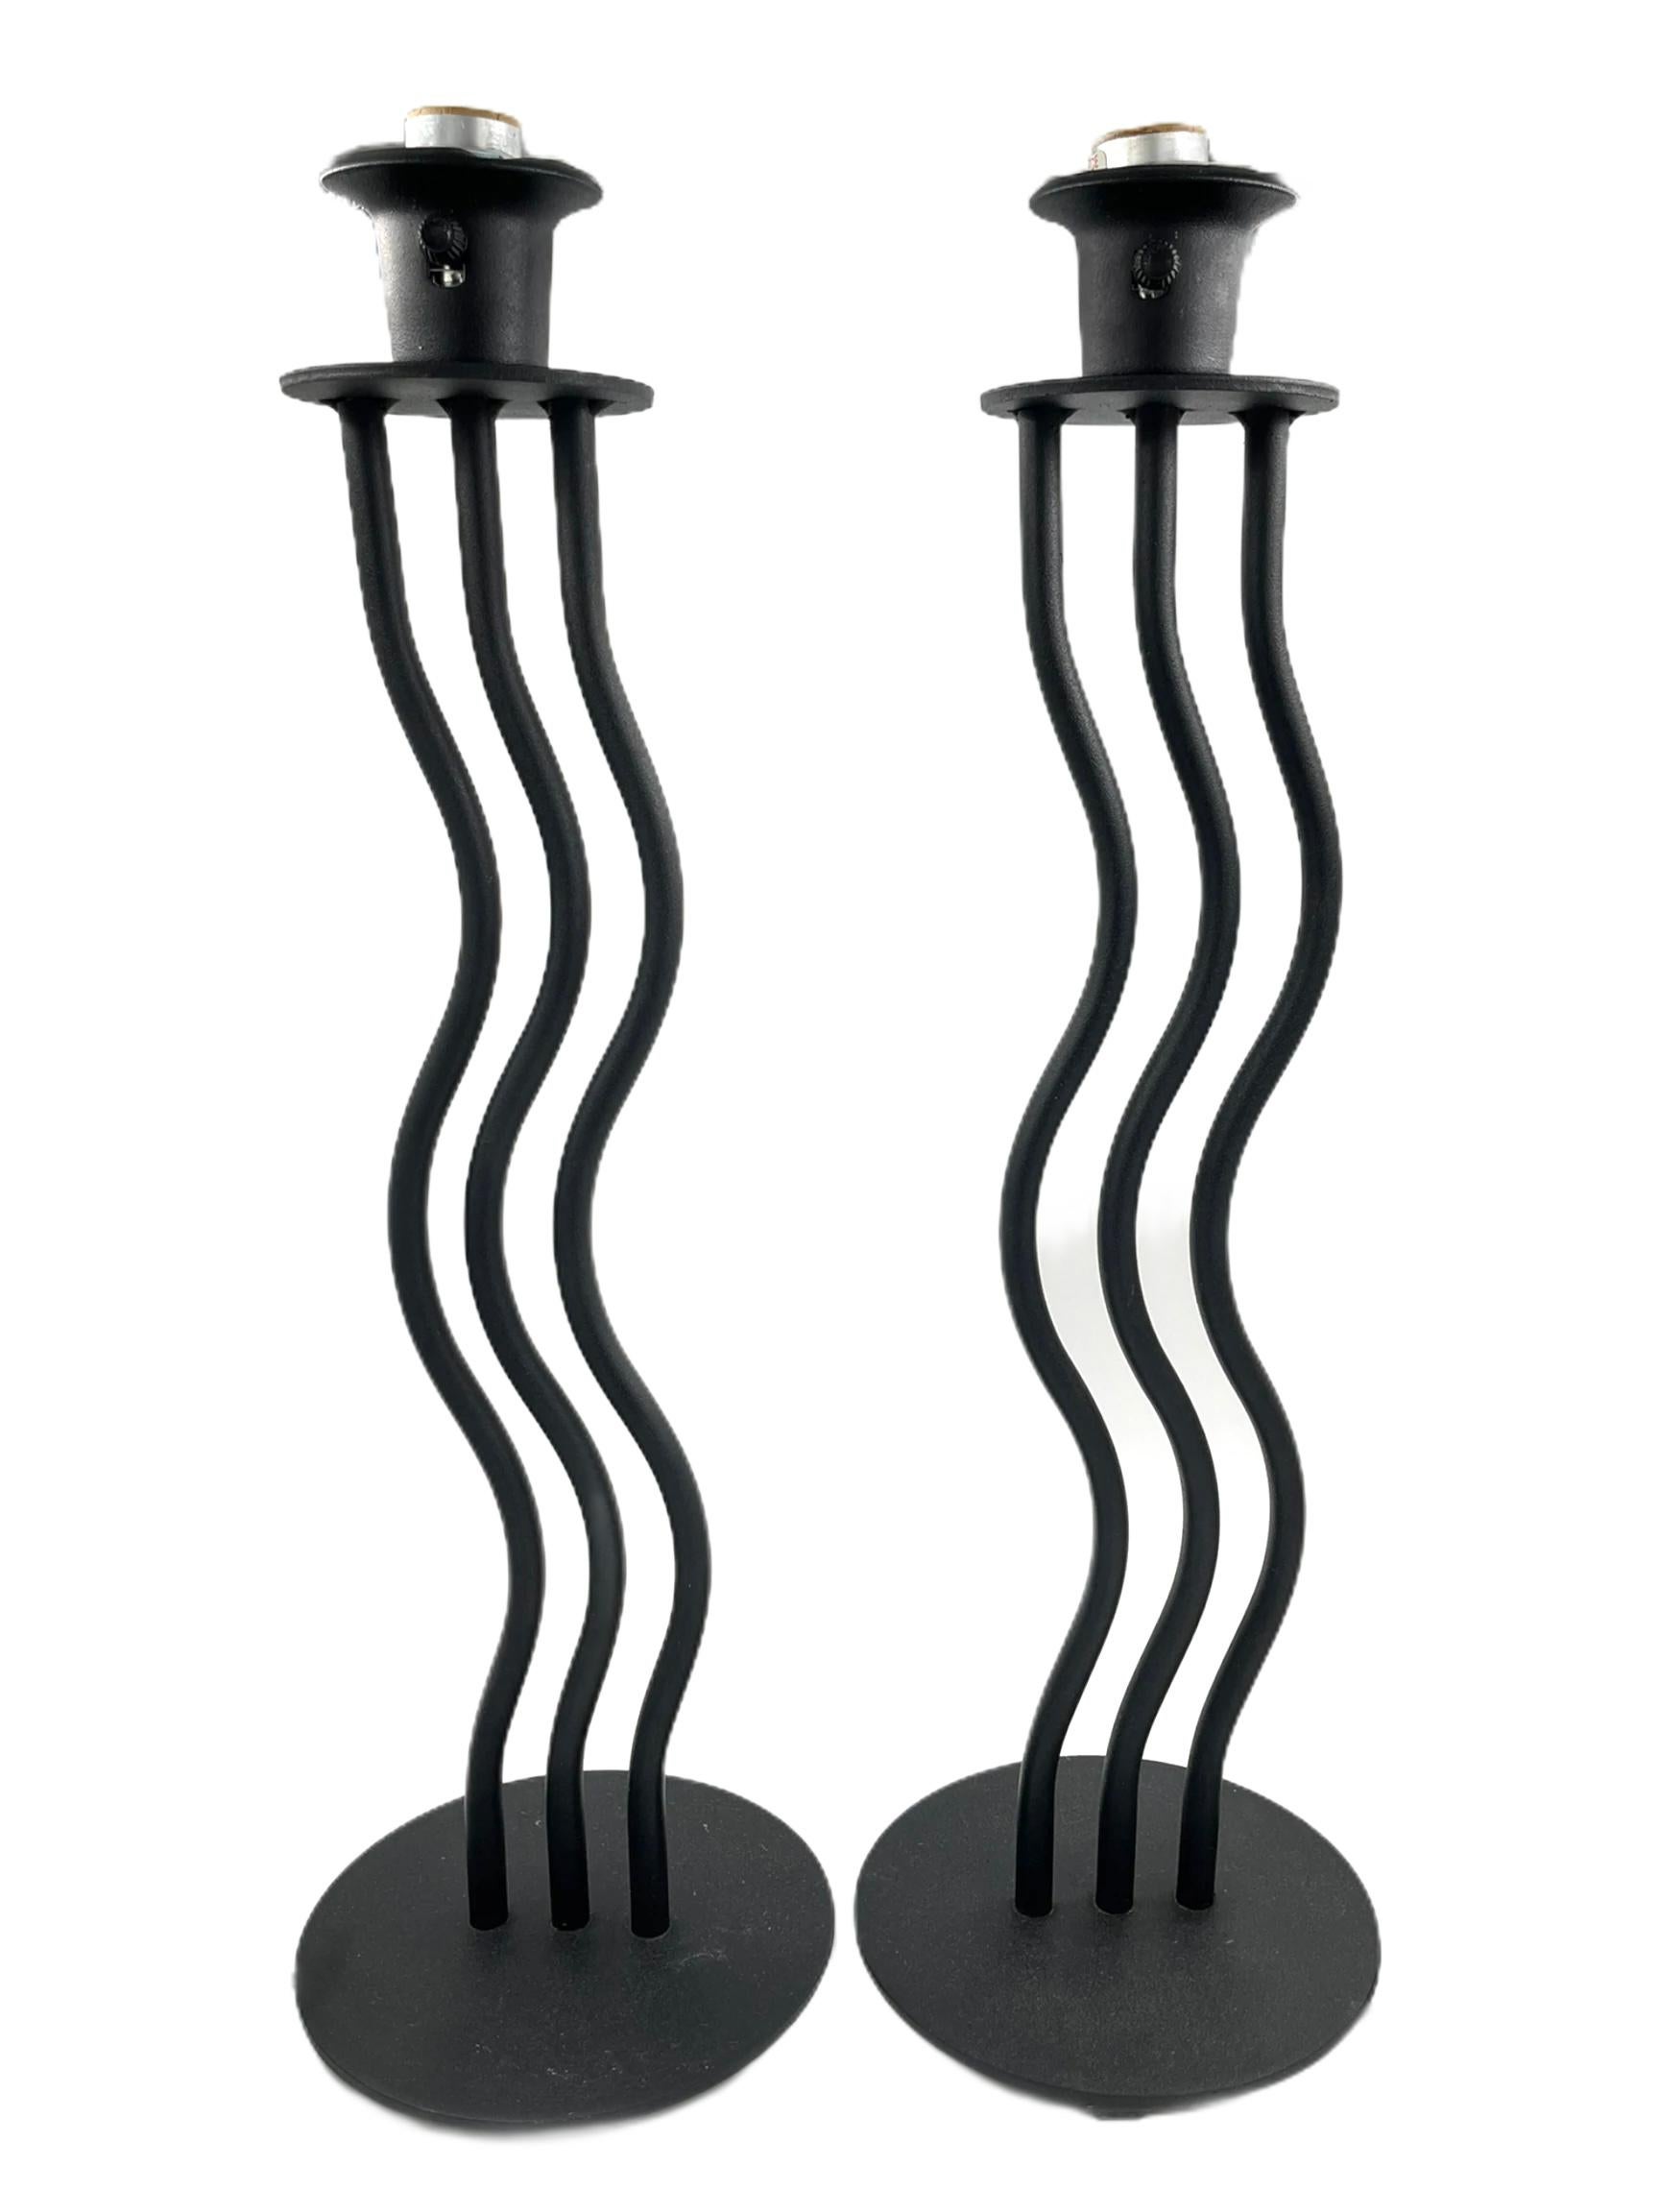 Iconic 80's black iron wave lamps with new clip on shades manufactured by Crosswell. Rewired, New shades.

New Danish designed, knife pleated Eclipse lampshade. It is manufactured using traditional techniques, machinery and expertise to produce a